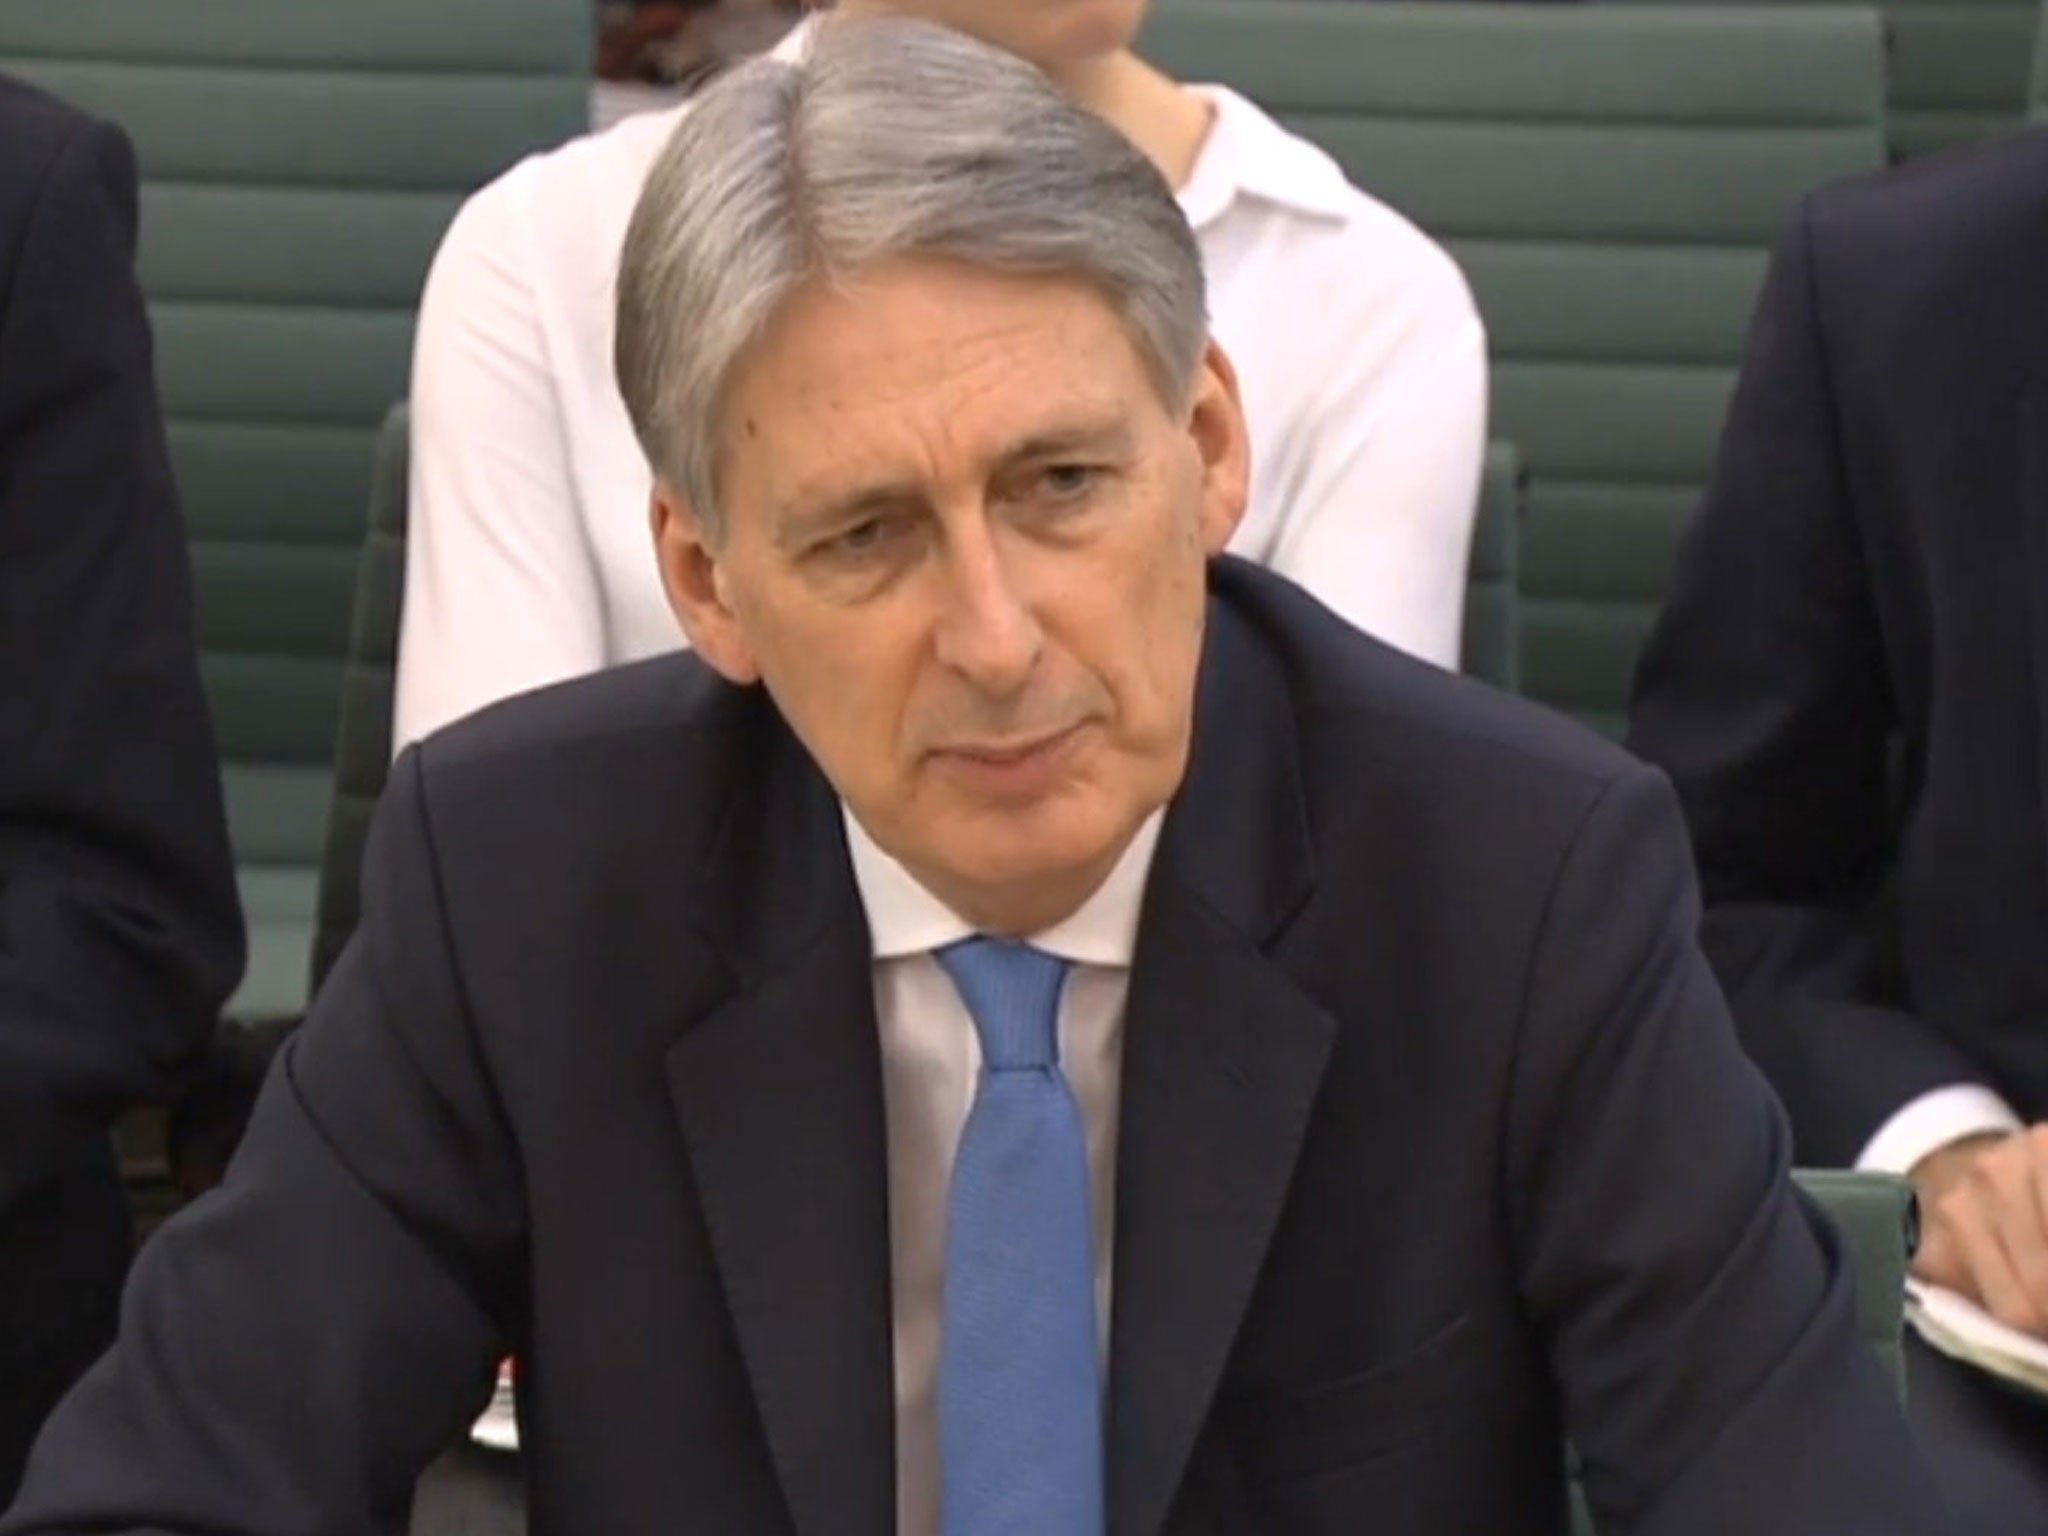 Philip Hammond made his comments on a trade mission to China